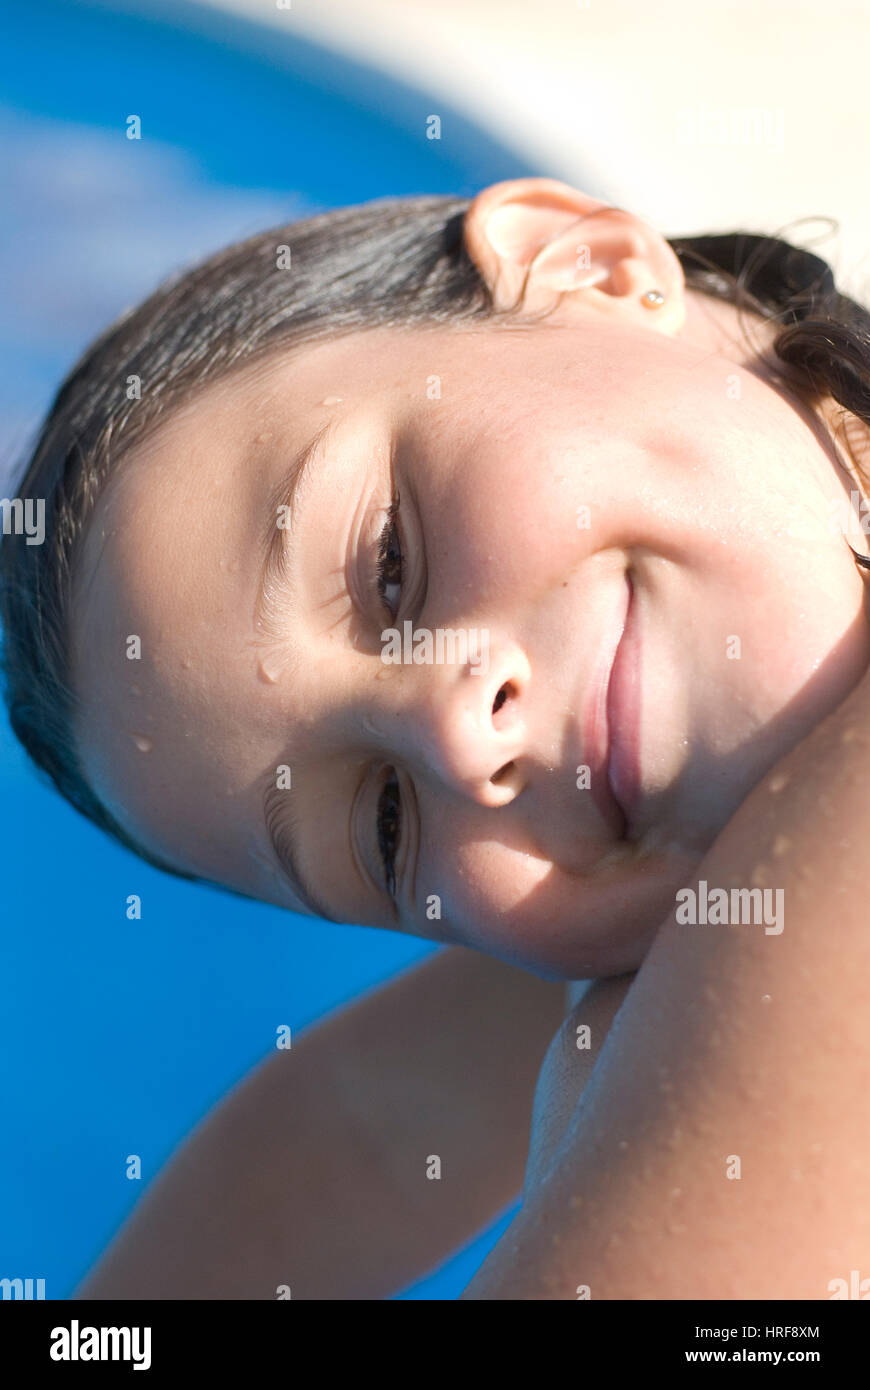 Young girl 10 years old, playing on the swimming pool Stock Photo